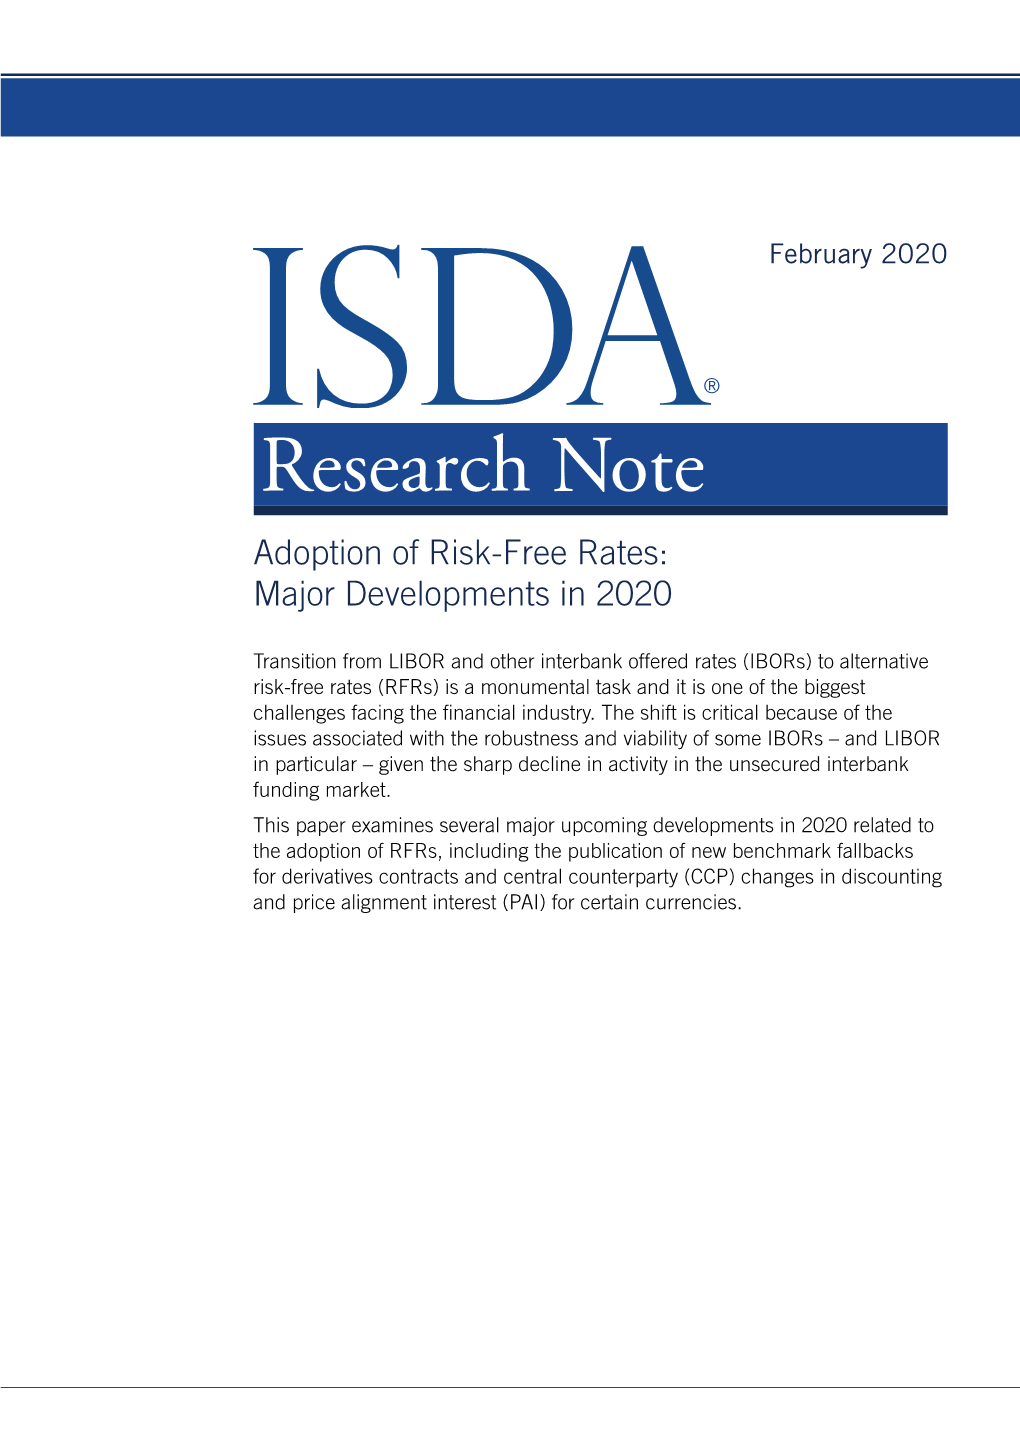 Research Note Adoption of Risk-Free Rates: Major Developments in 2020